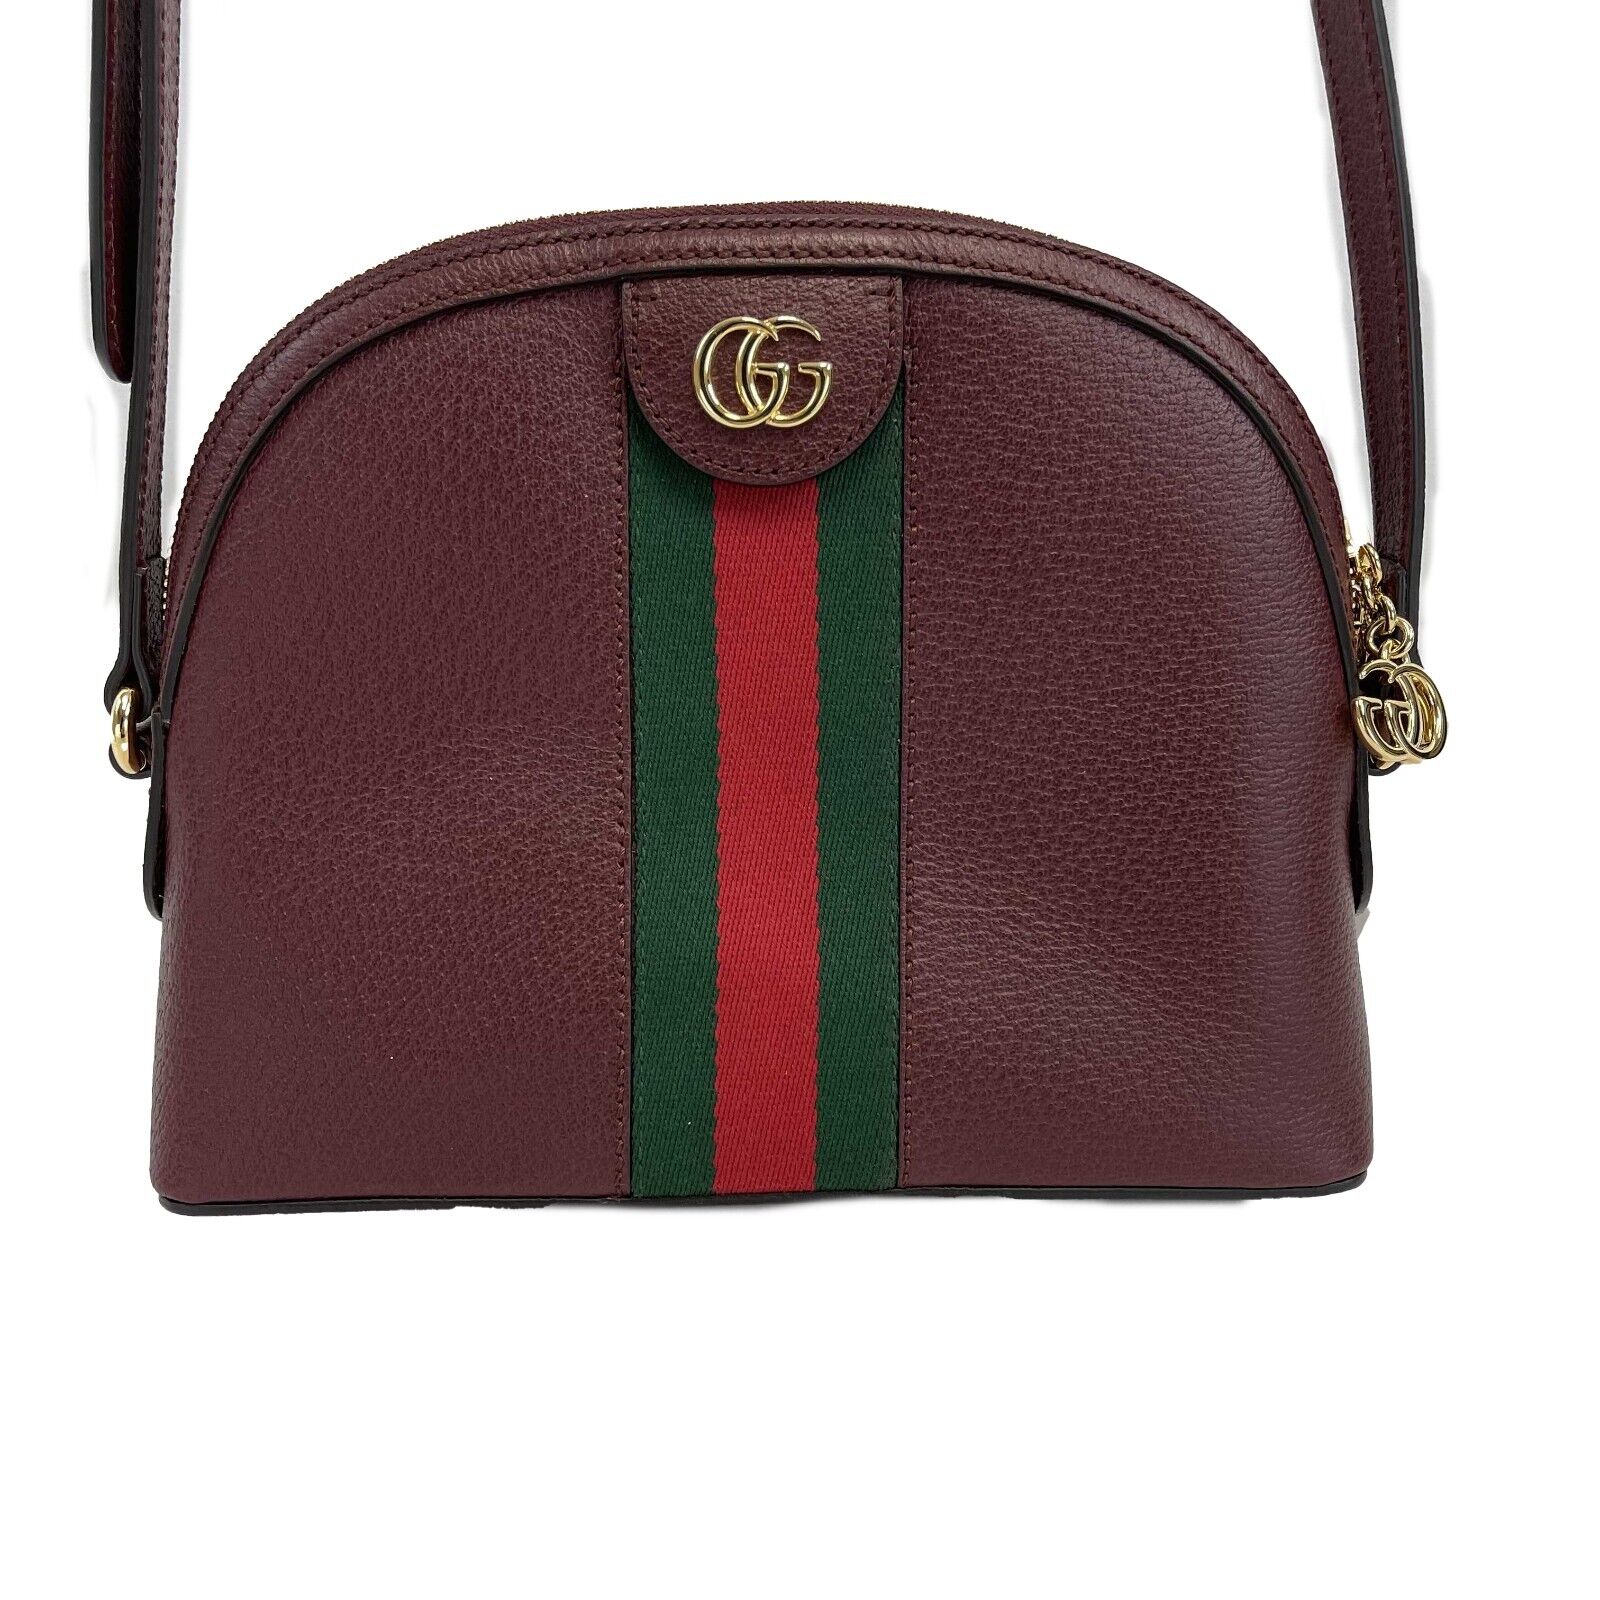 Gucci - Authenticated Ophidia Handbag - Leather Burgundy Plain for Women, Never Worn